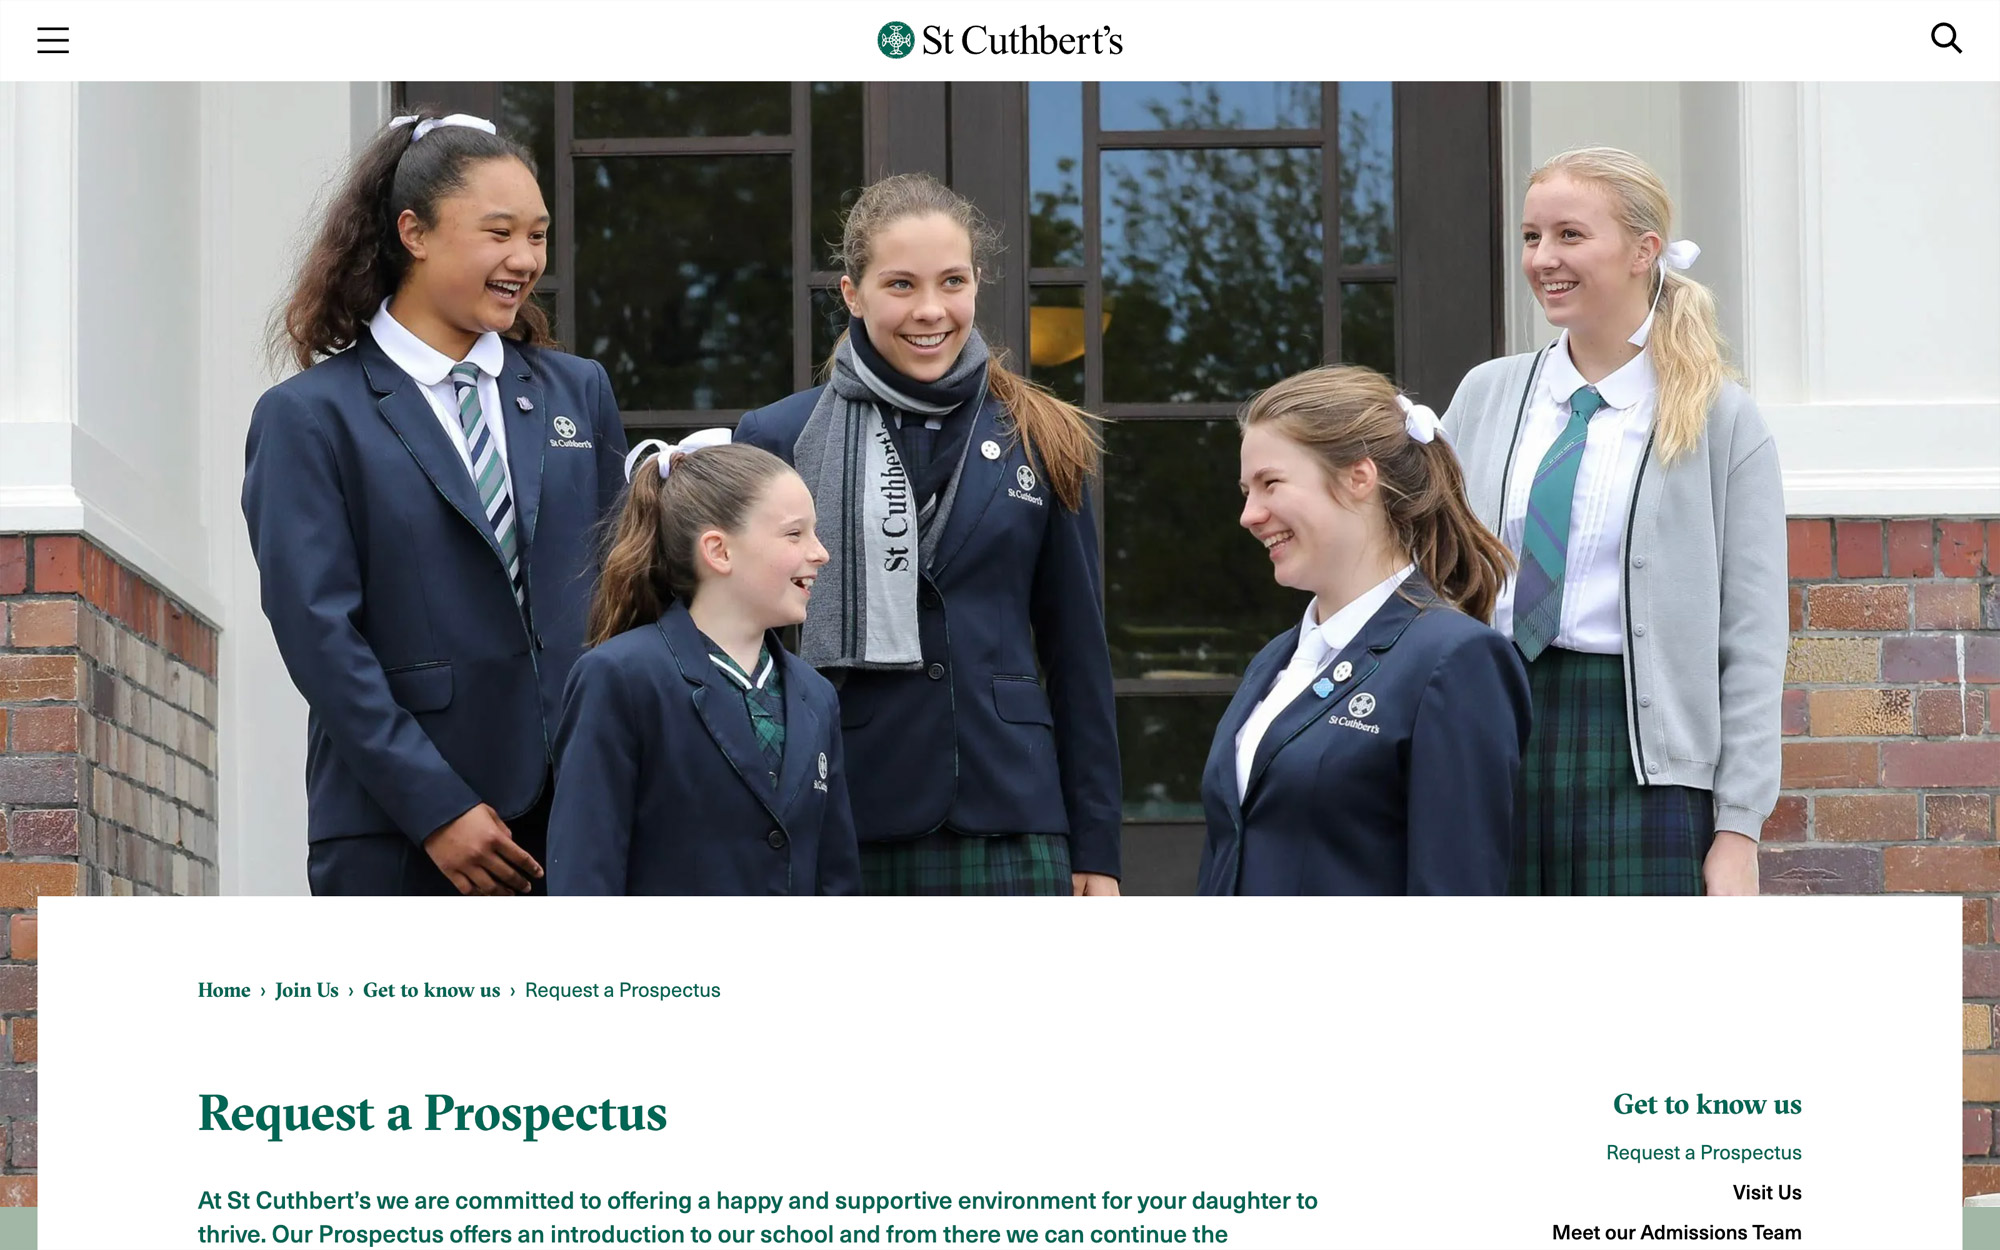 Photo of a page on the St Cuthbert's website, with a large header image. the page title is "Request a Prospectus".